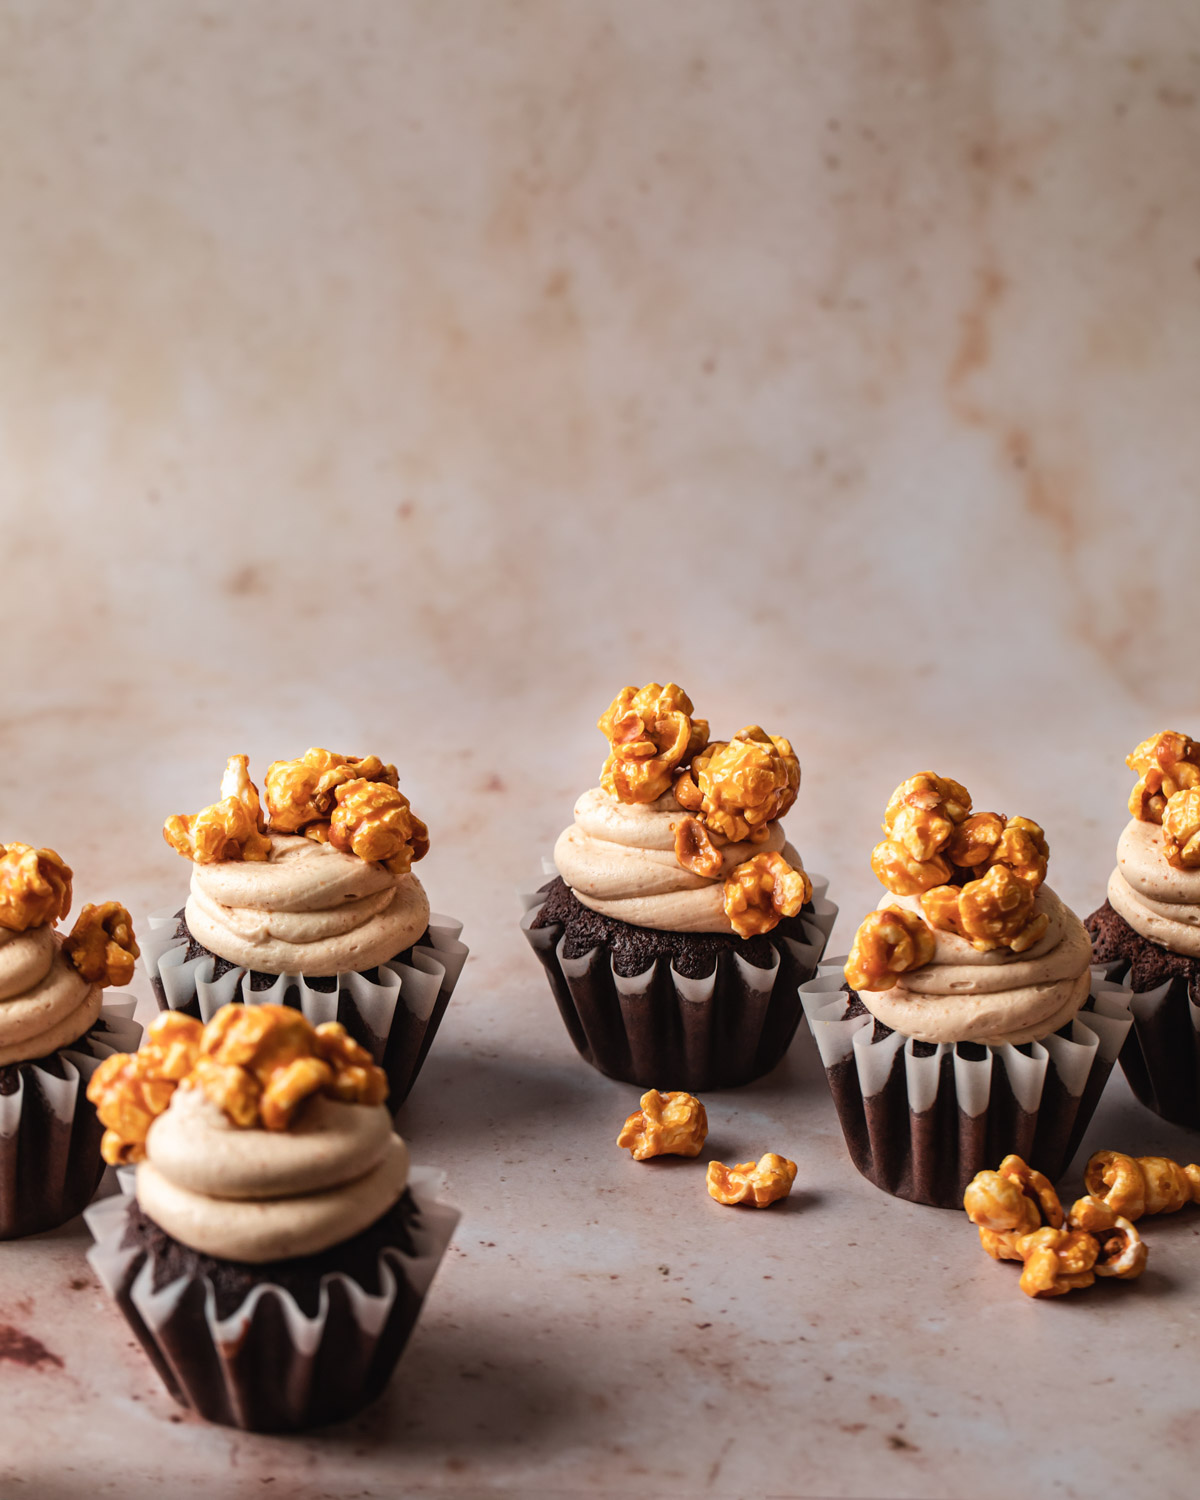 Chocolate cupcakes with swirls of peanut butter frosting on top a caramel popcorn